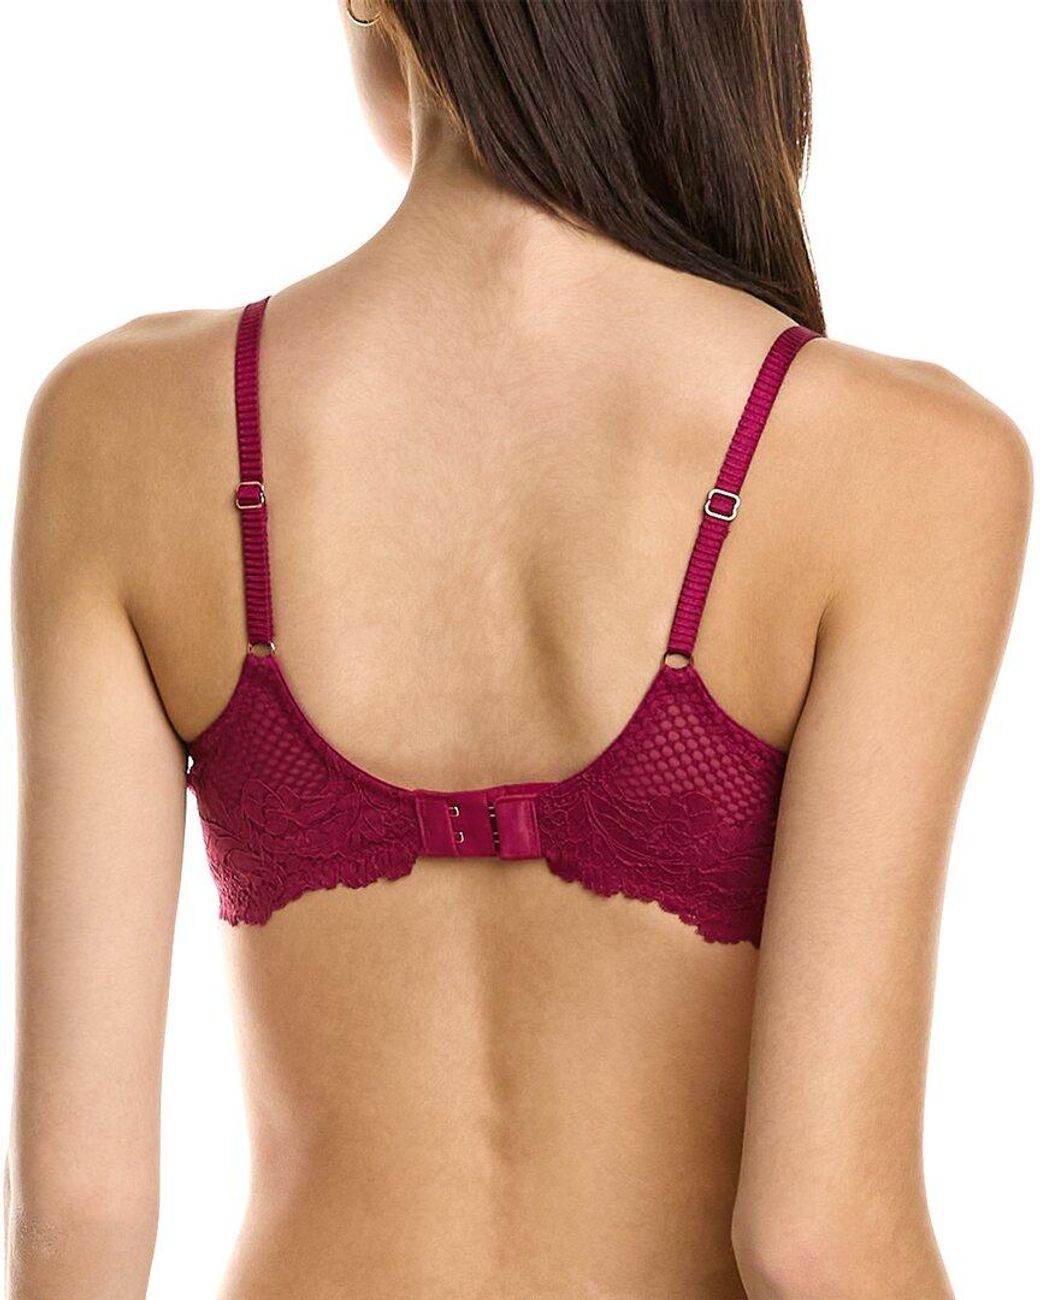 Le Mystere Lace Allure T-shirt Bra in Red